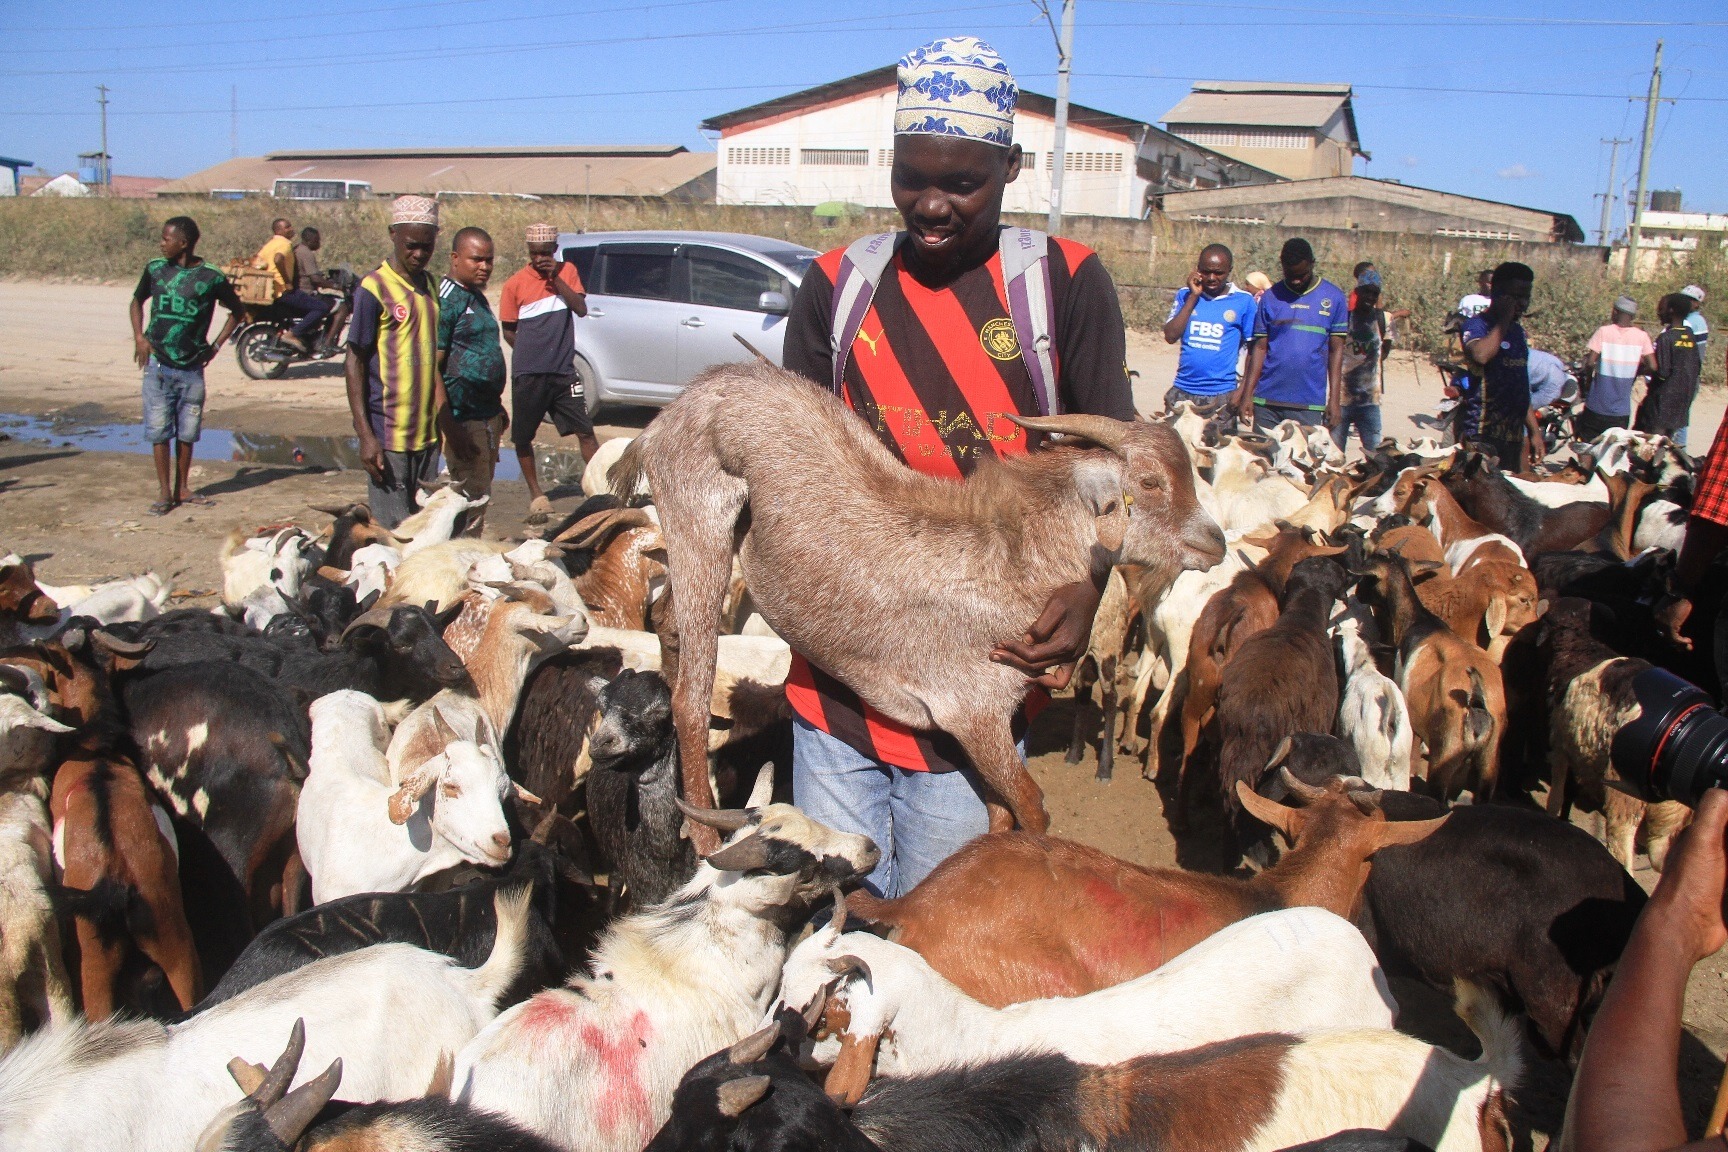 Dar es Salaam’s Vingunguti ‘goat market’ a true beehive of activity yesterday morning as residents of various parts of the city sought goats to slaughter for Eid el-Hajj, the retail price having risen markedly to between 120,000/- and 200,000/- per goat